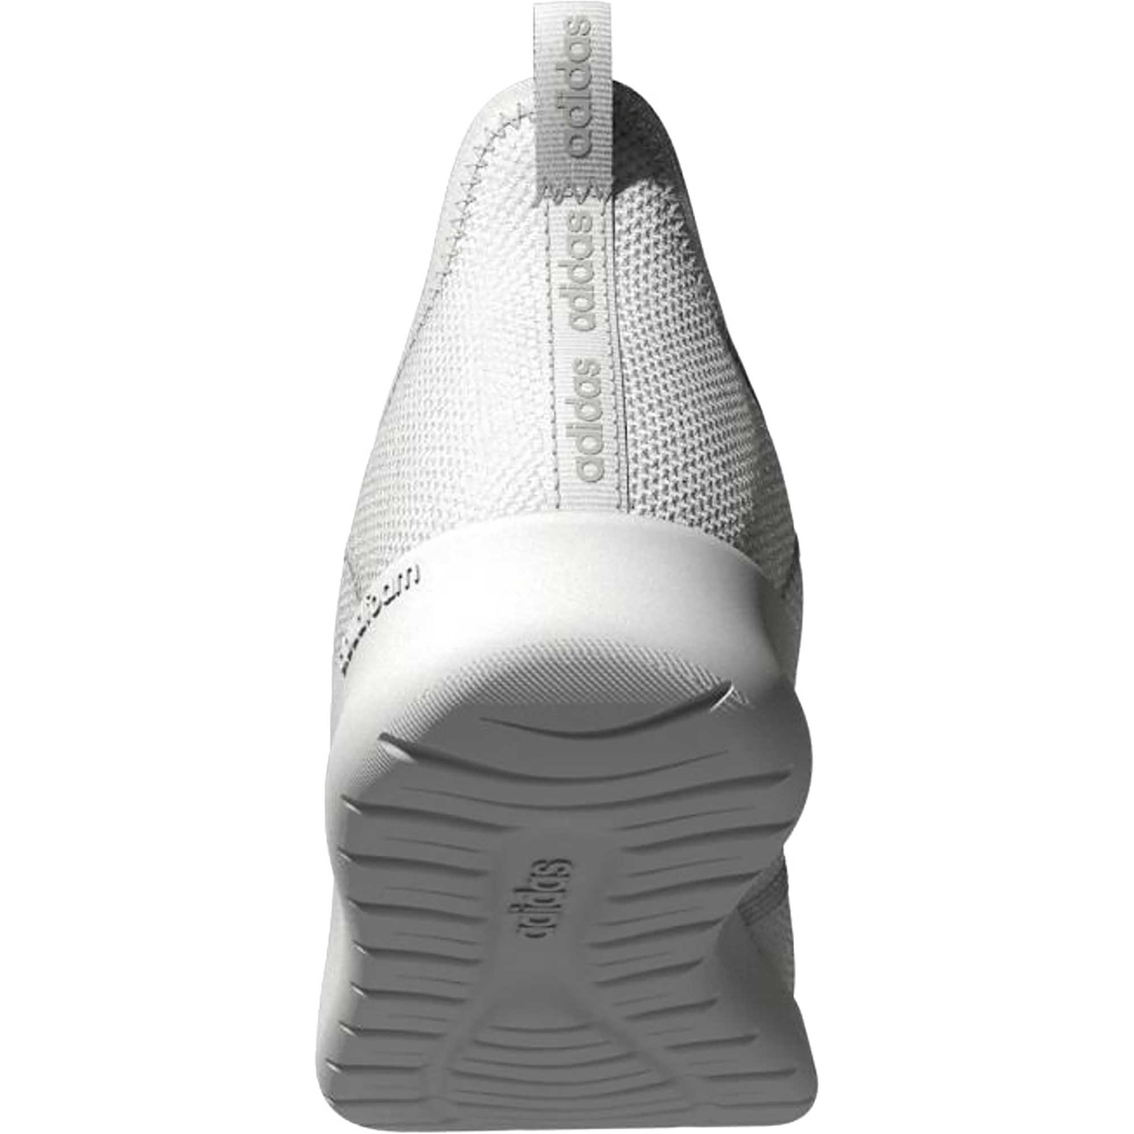 Adidas Women's Cloudfoam Pure 2.0 Sneakers - Image 6 of 10